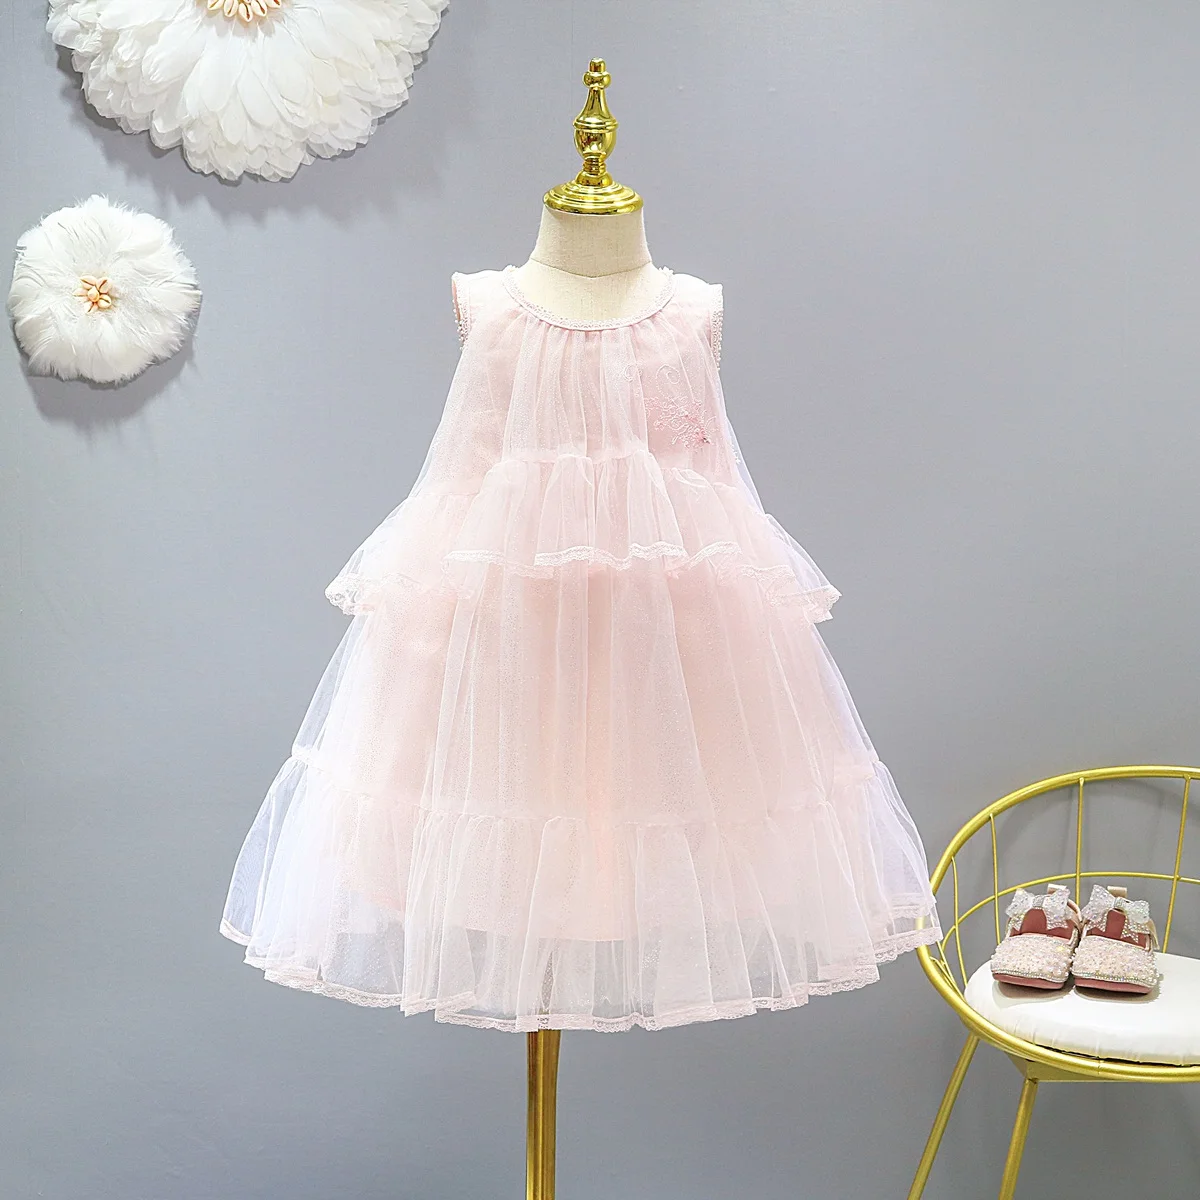 Kids Clothes Girls Dress Princess Costume Embroidery Layer Ruffles Summer 4-13 Years Party Dresses For Girl Children's Clothing